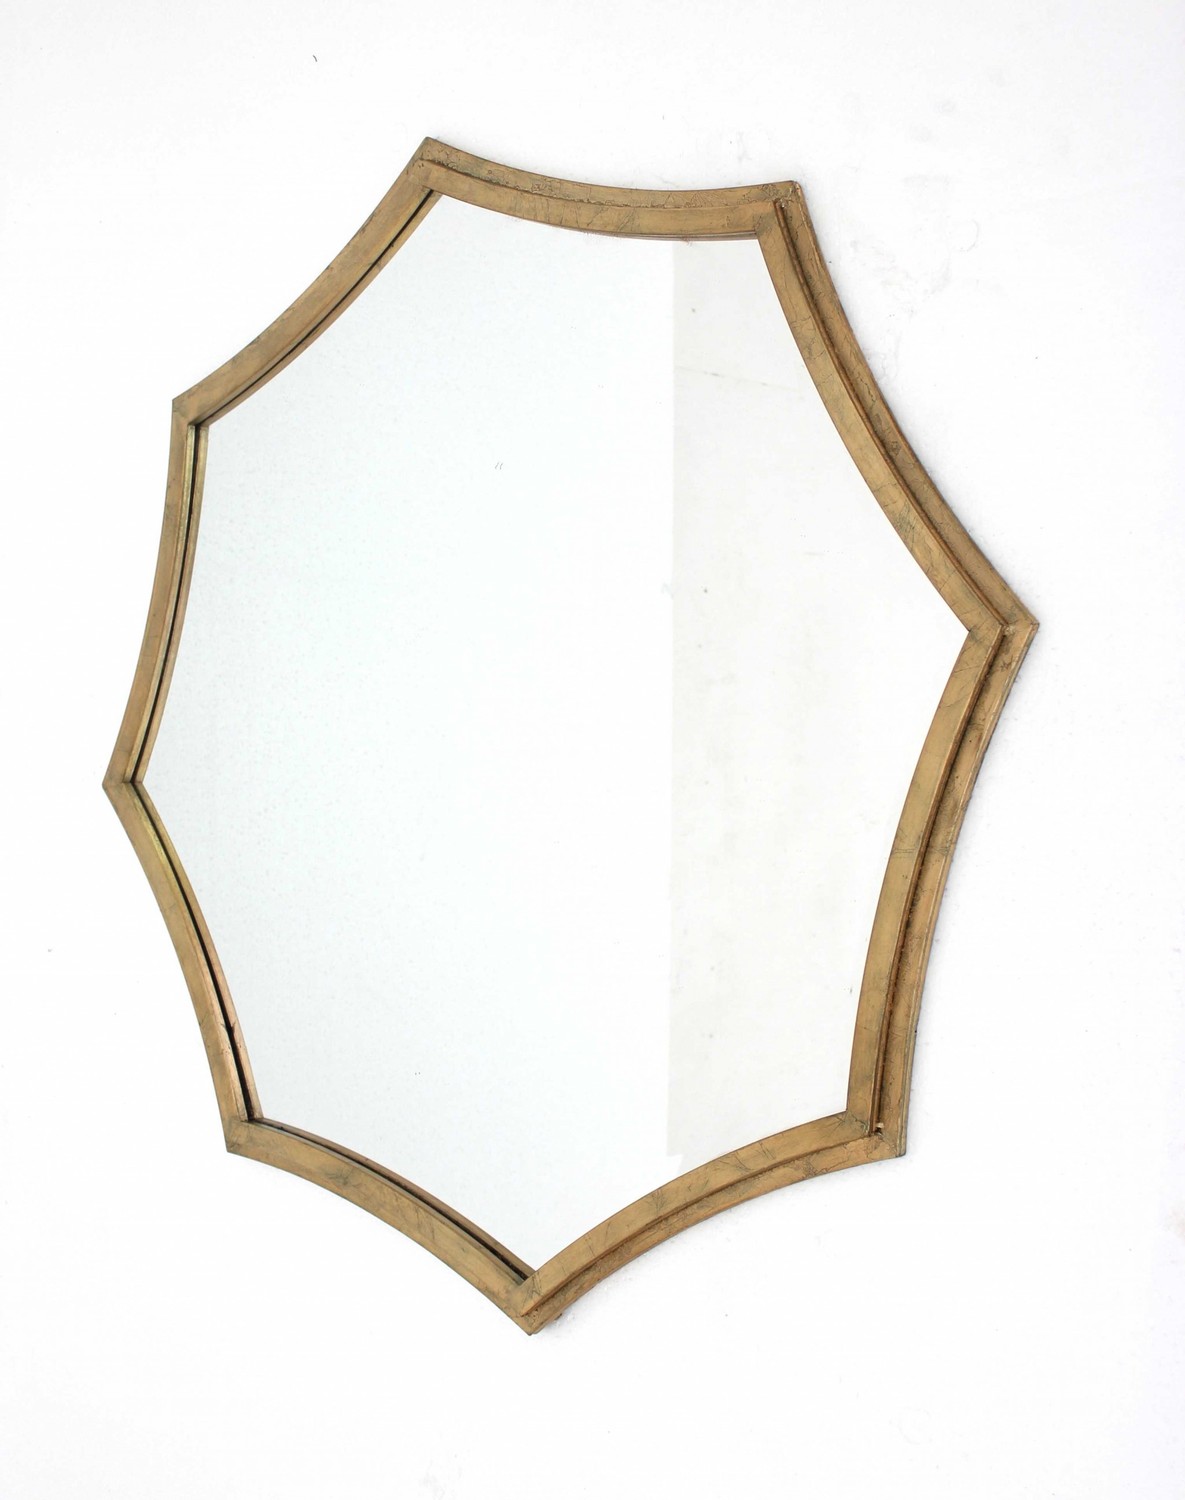 33" x 33" x 1" Gold Curved Hexagon Frame Cosmetic Mirror